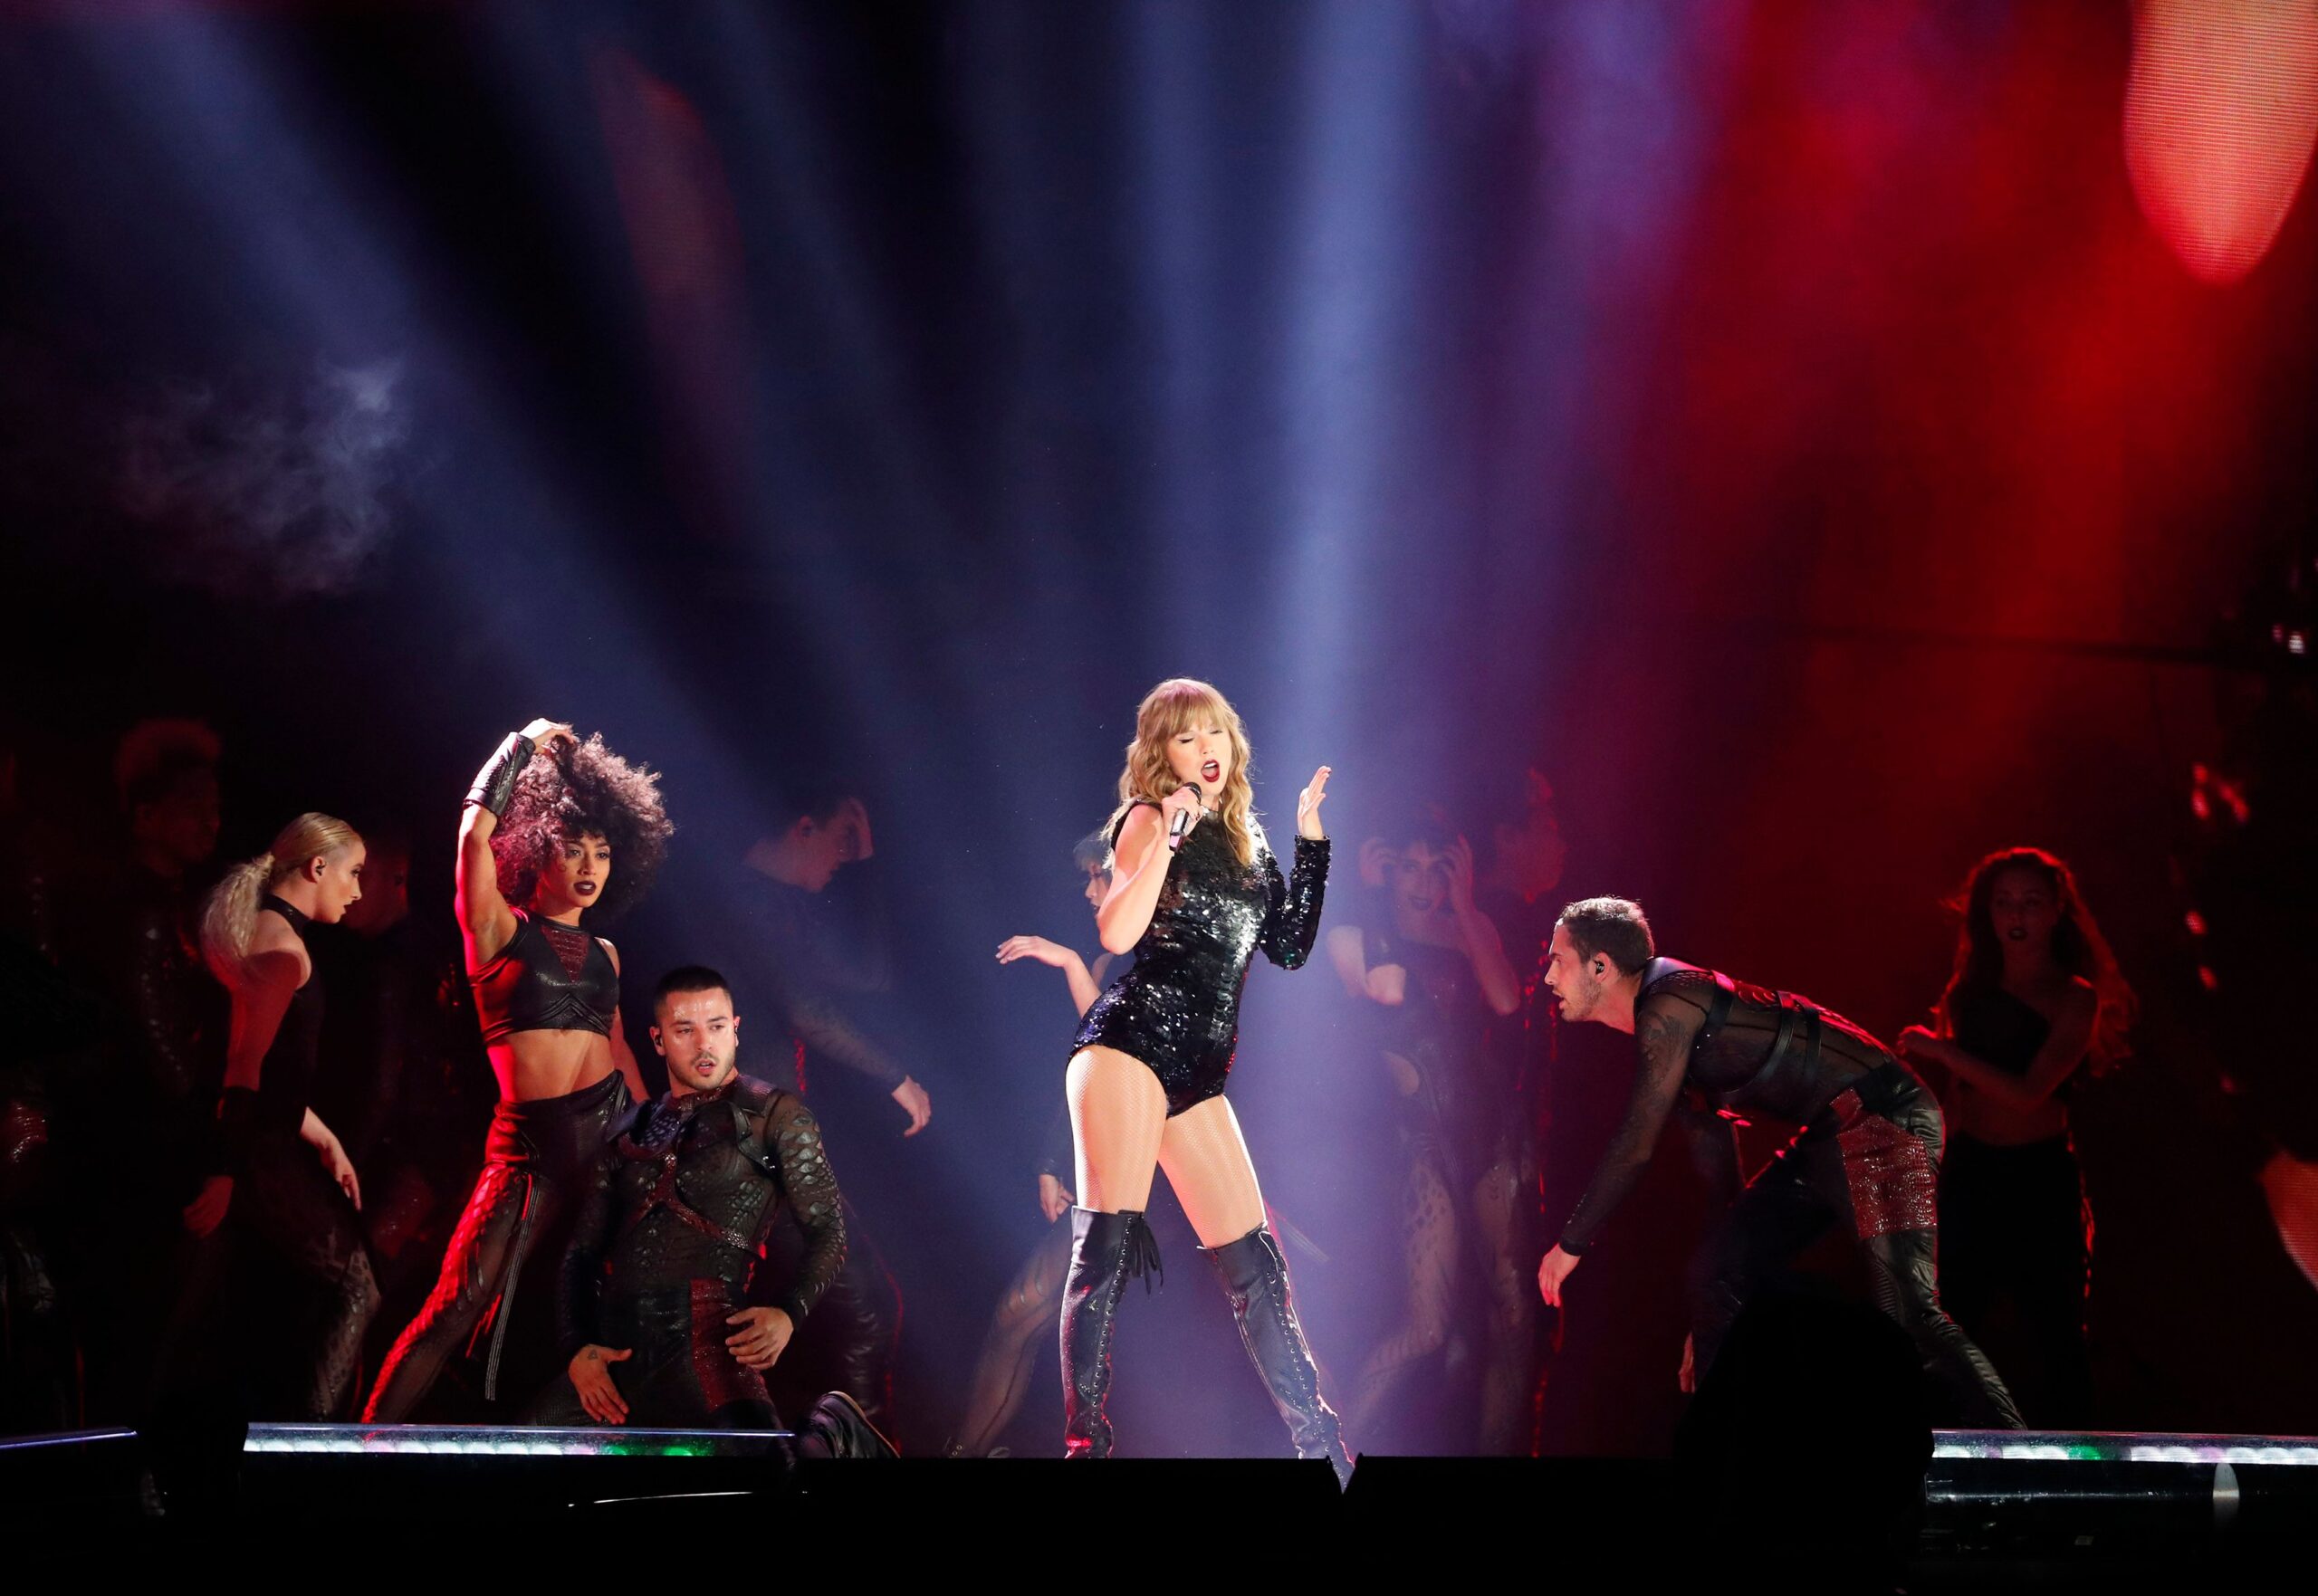 The Super Bowl Halftime Shows With The Most Star Power